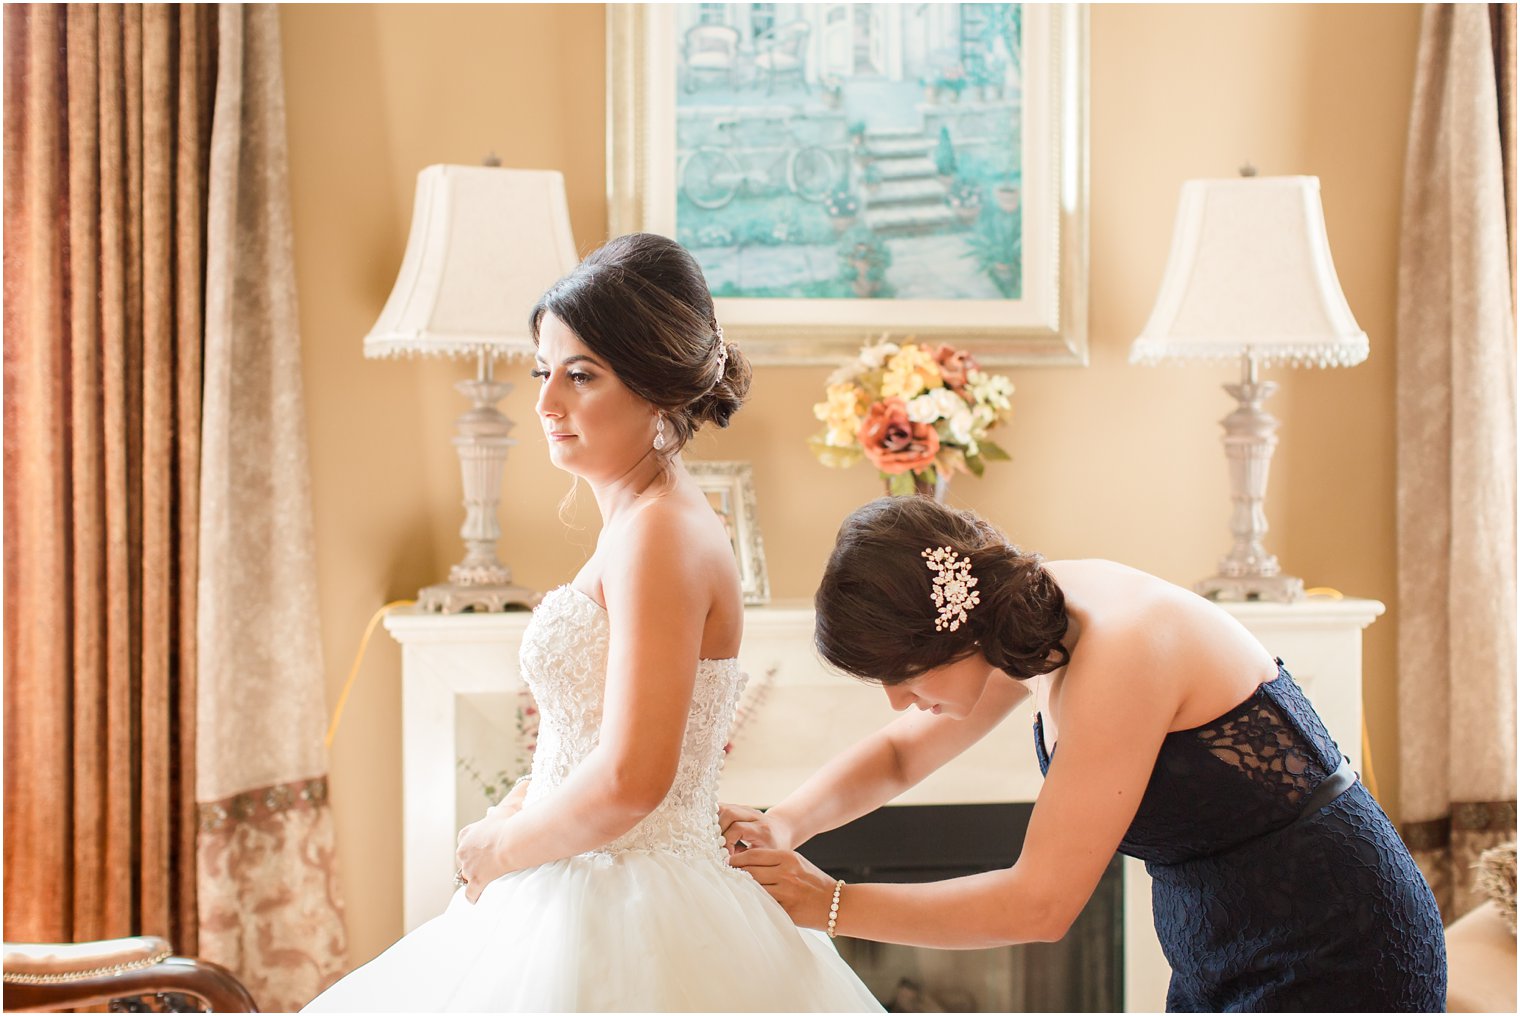 Bride getting ready with her maid of honor